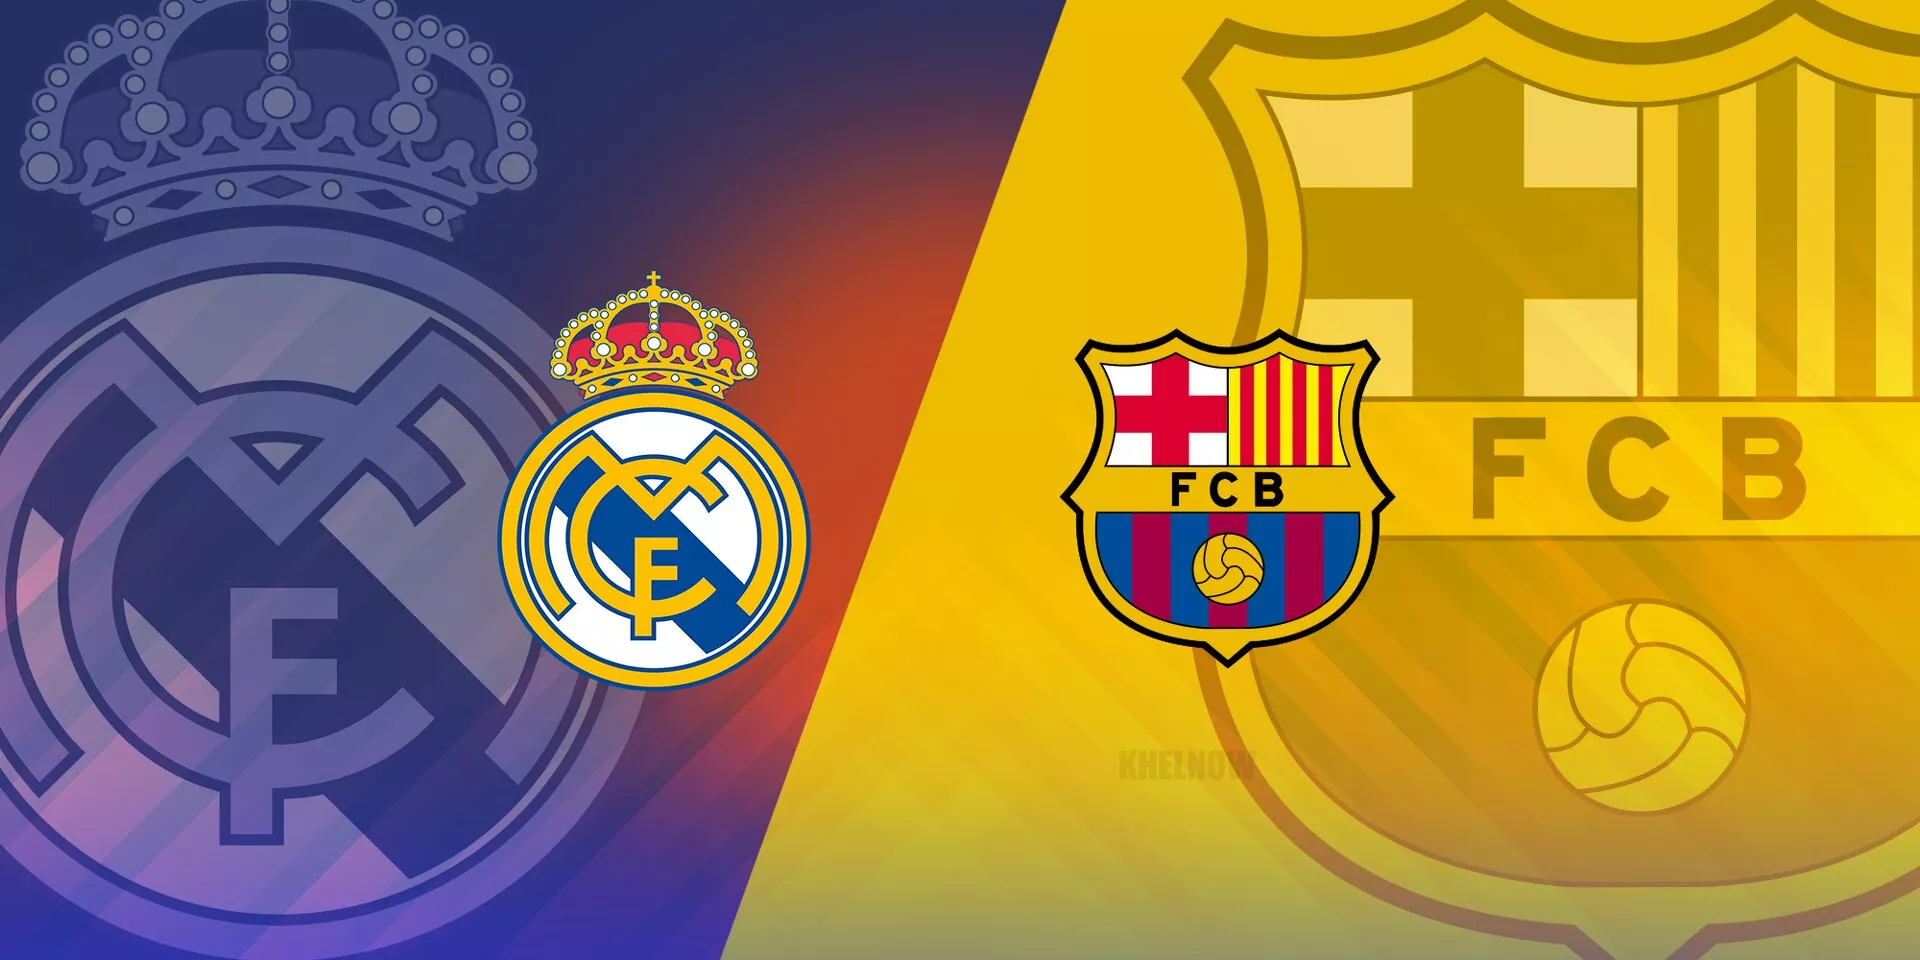 Where and how to watch Real Madrid vs Barcelona in India, UK, USA and